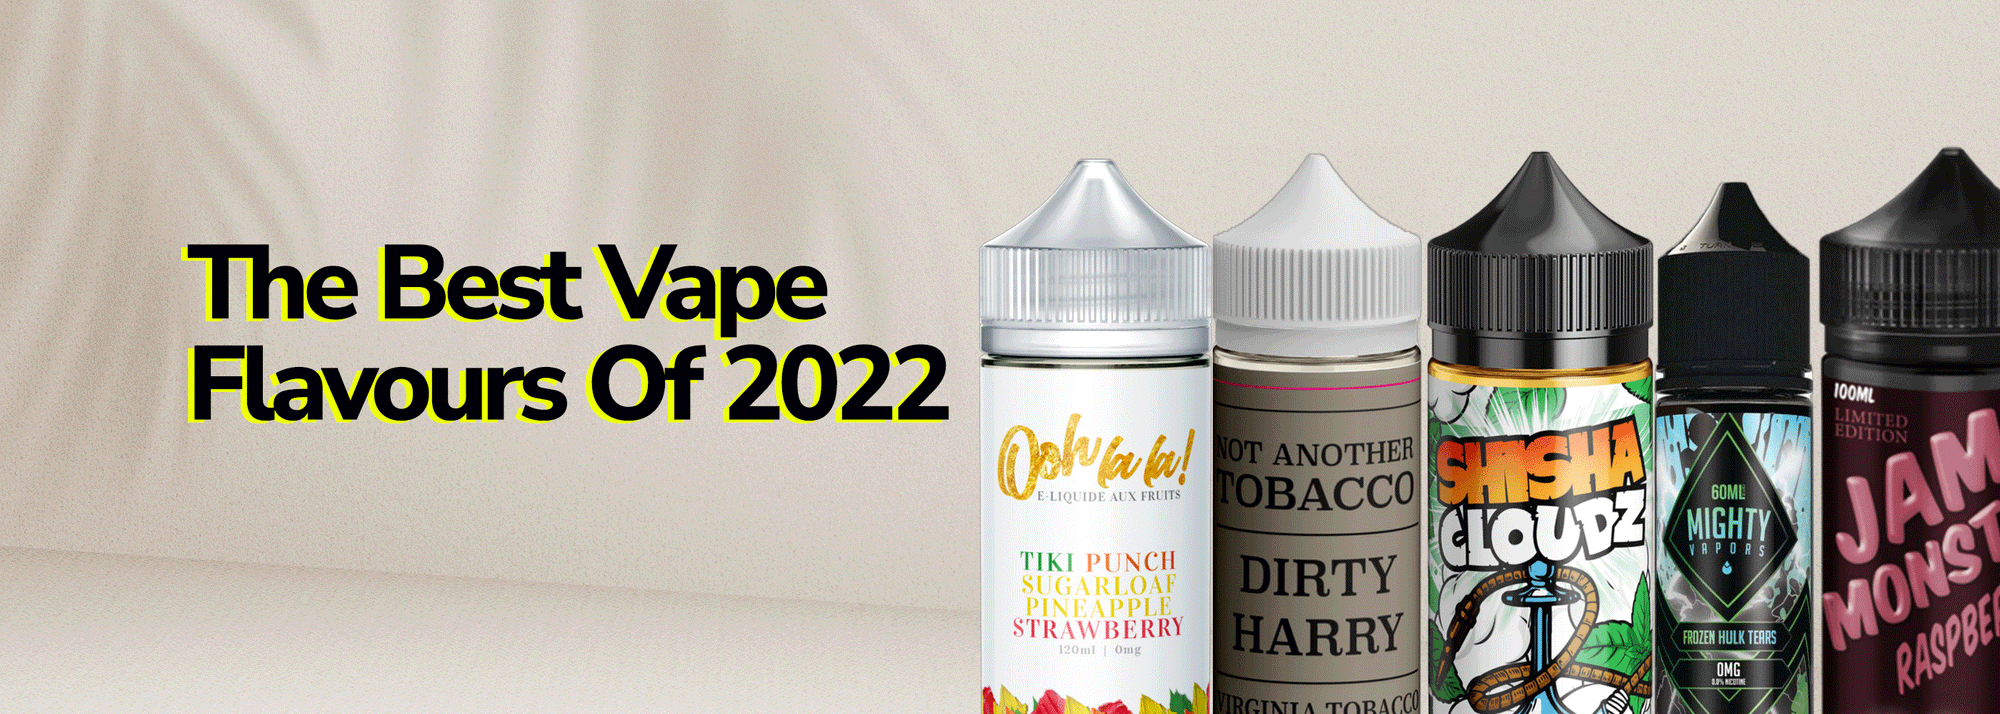 The Best Vape Flavours Of 2022 -Wick and Wire Co Melbourne Vape Shop, Victoria Australia